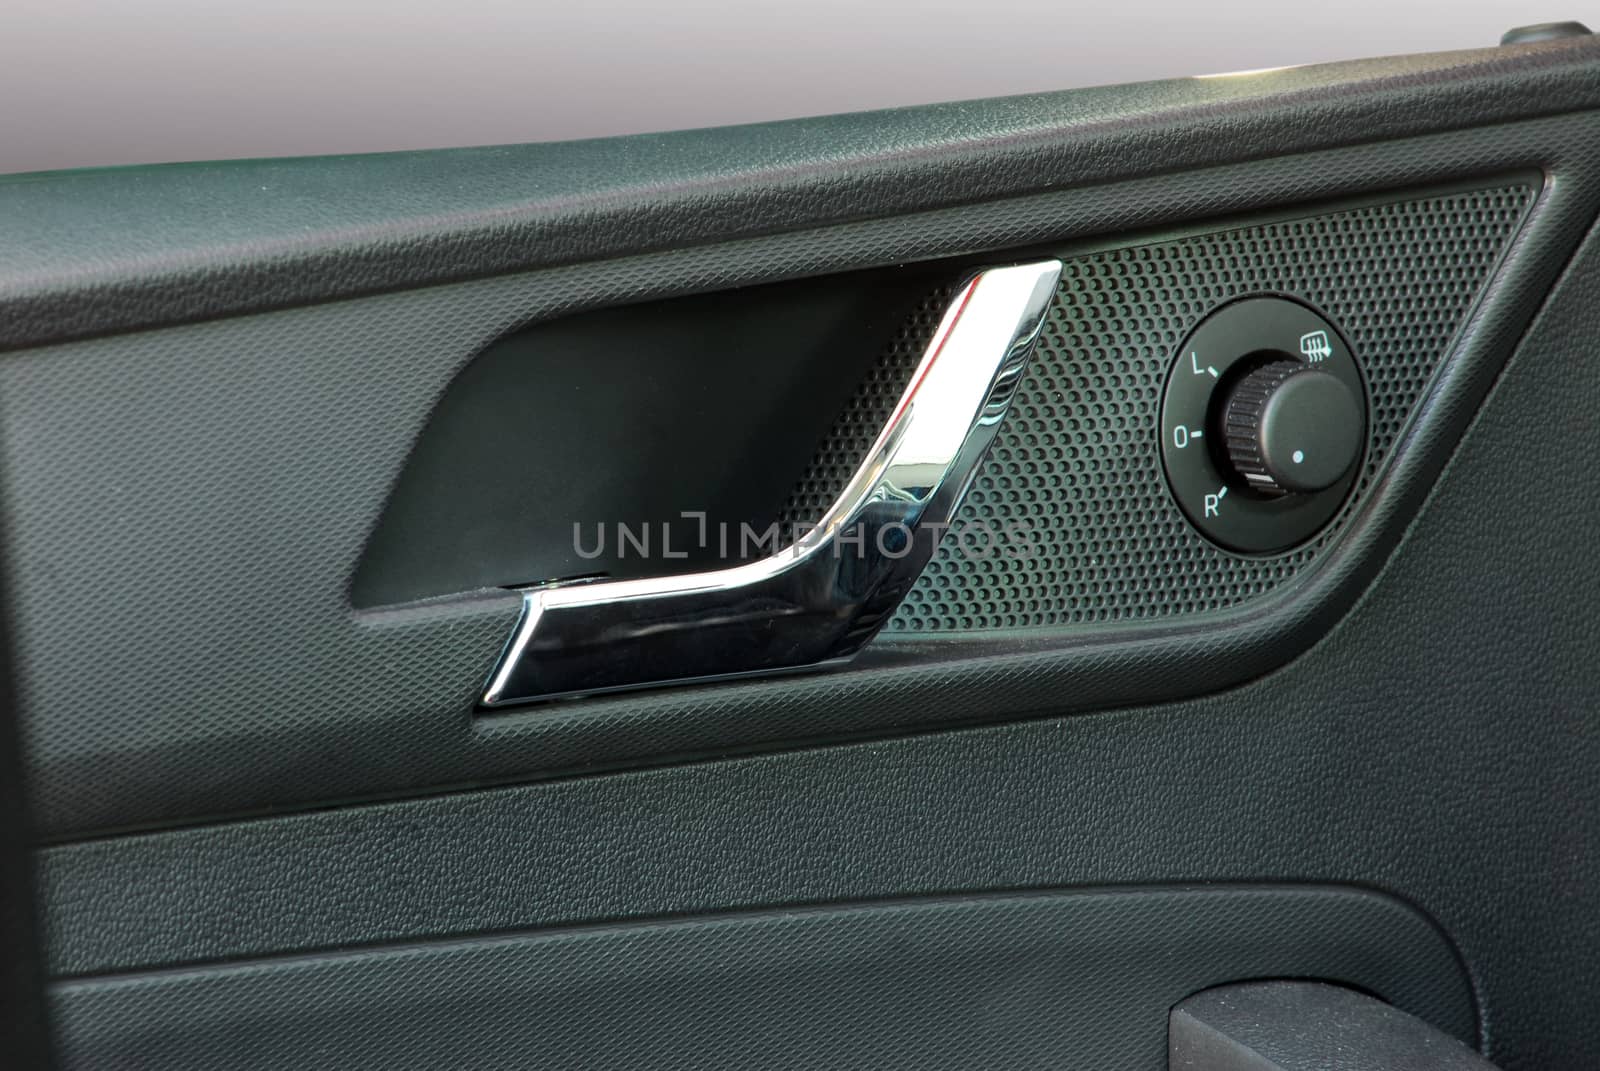 passenger car door handles and electric detail, the inside of the car